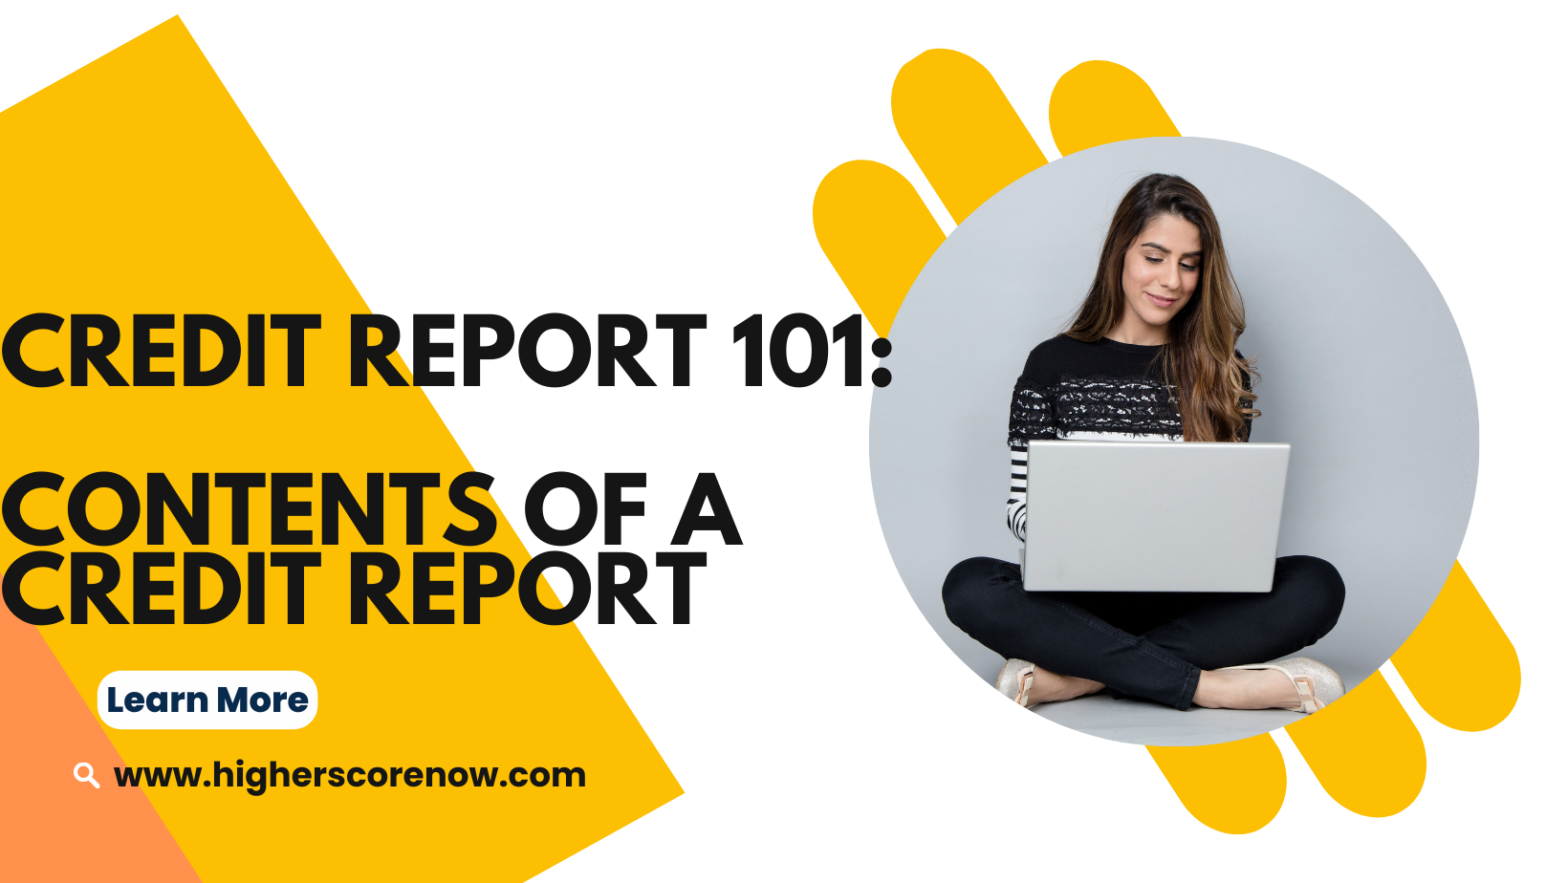 Credit Report 101 Understanding the Contents of a Credit Report